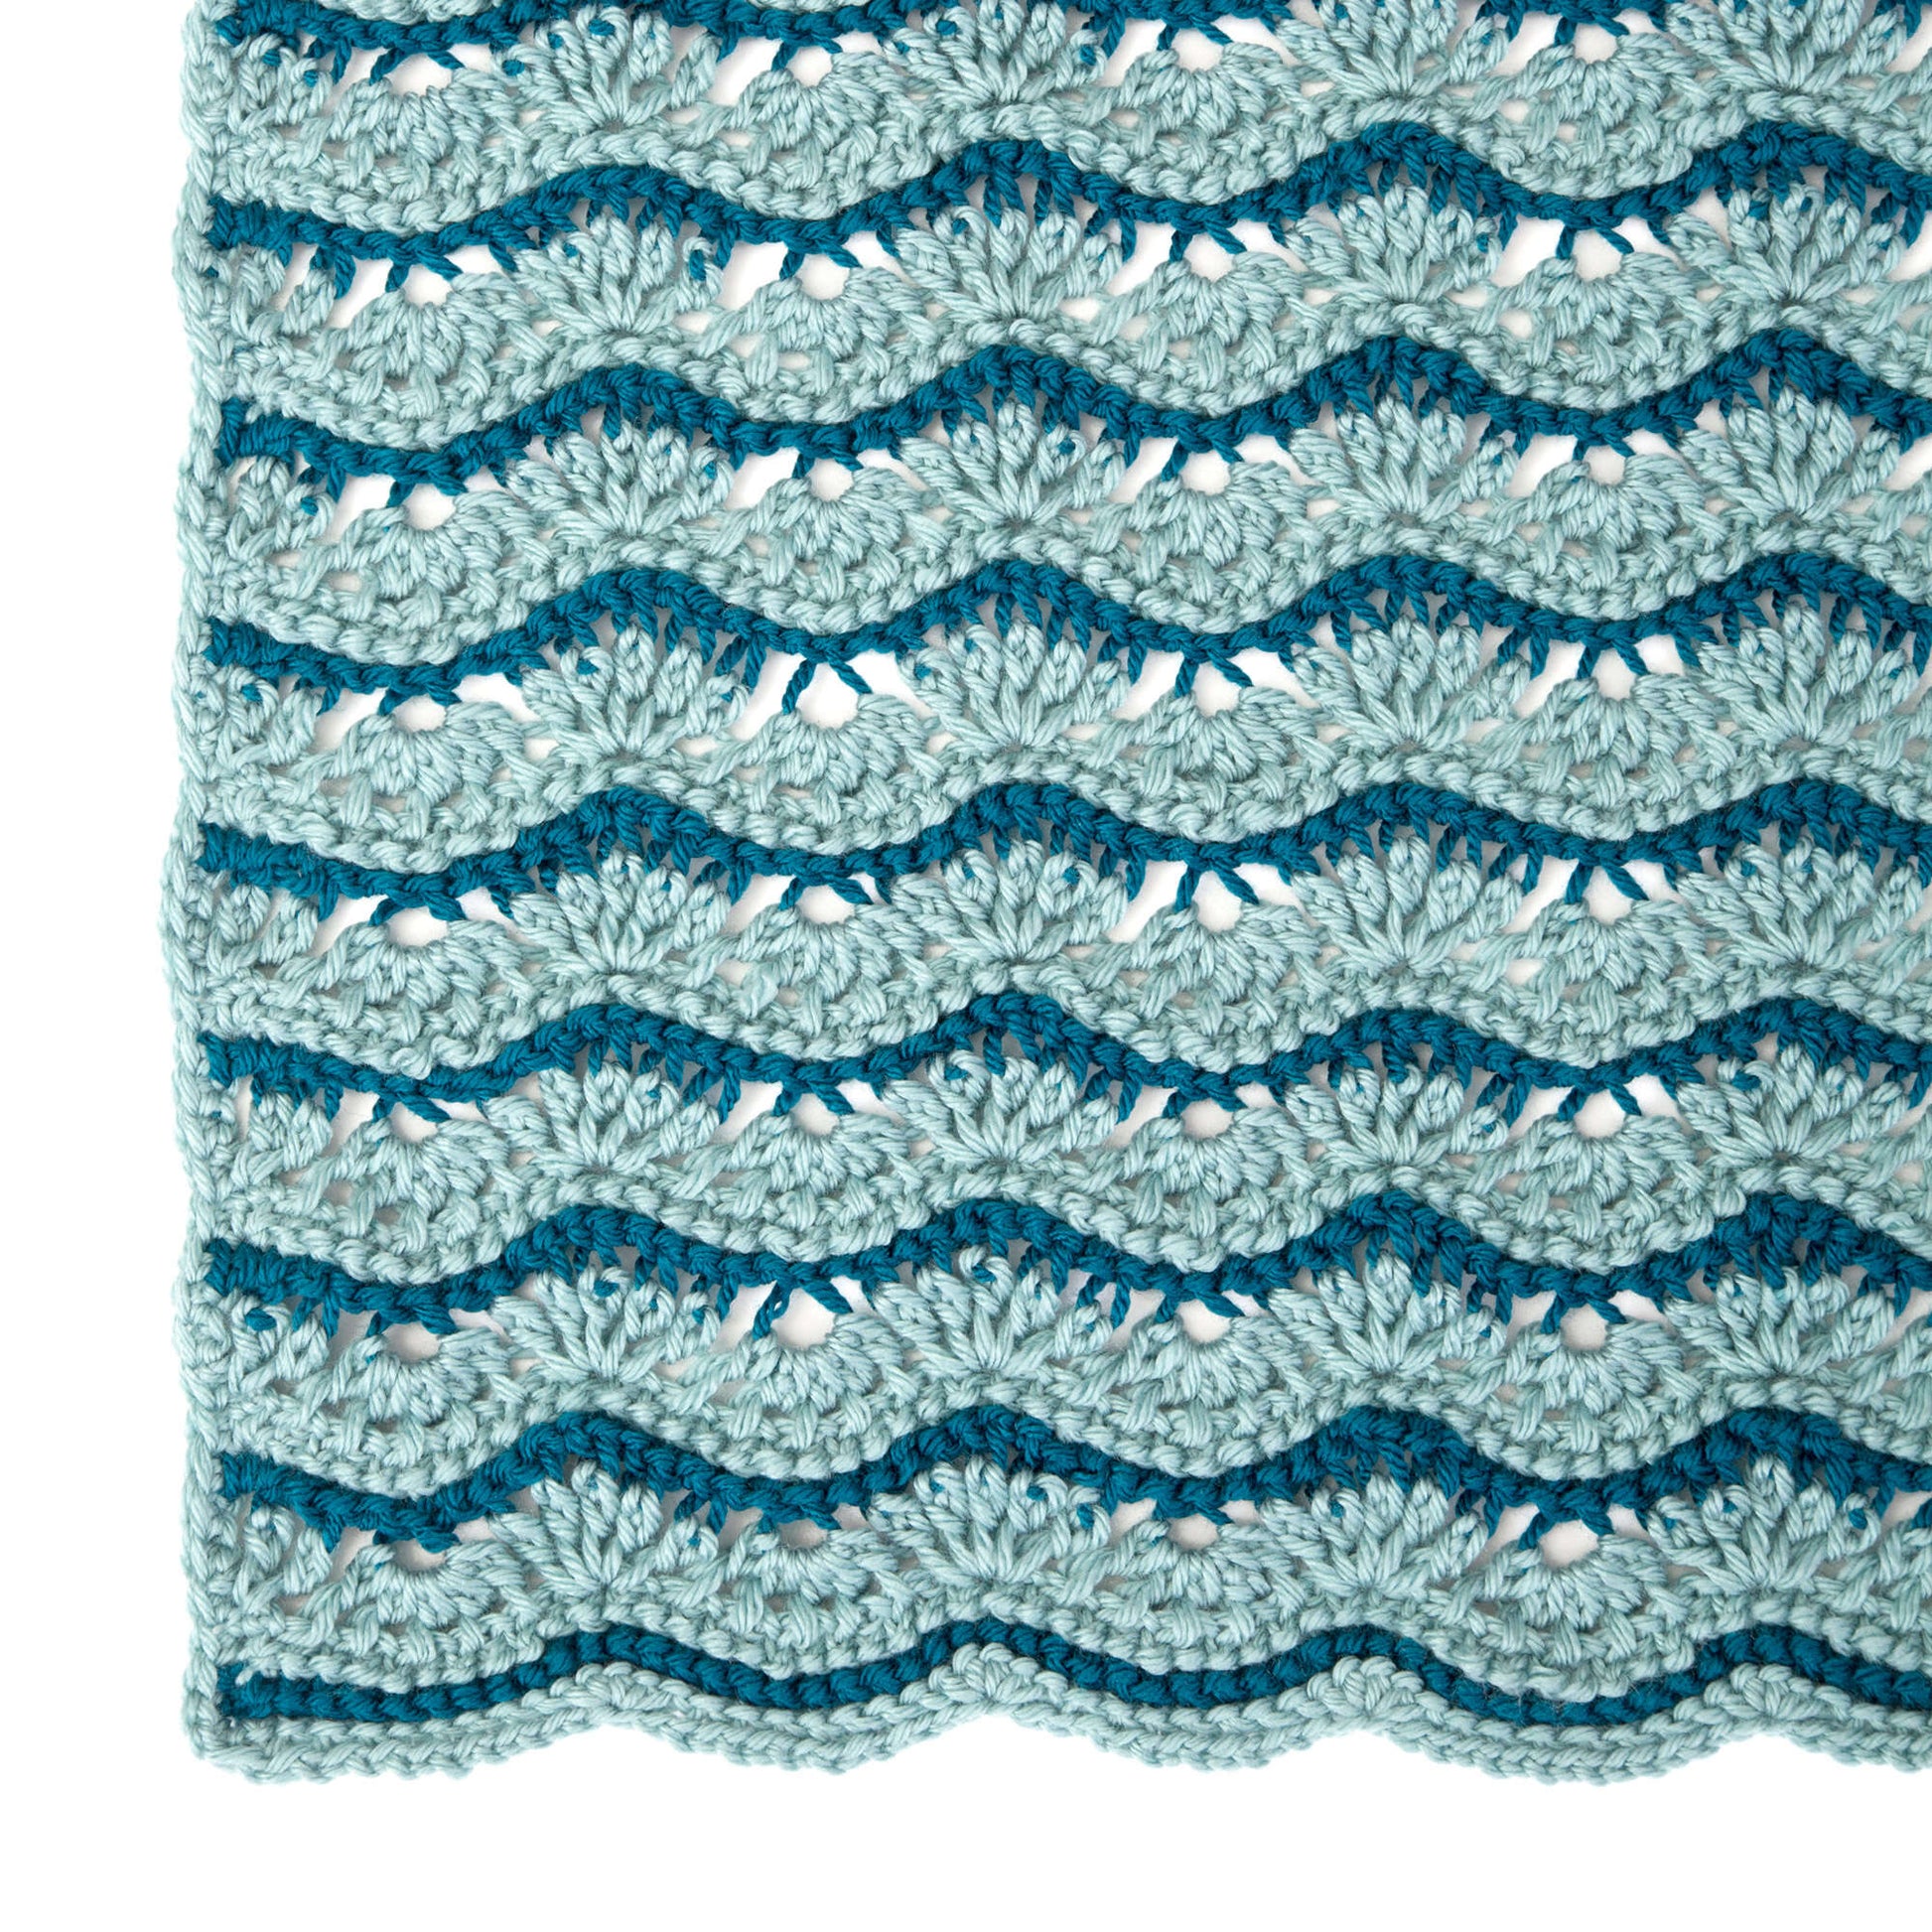 Free Red Heart Wistful Waves Lapghan Or Throw Pattern